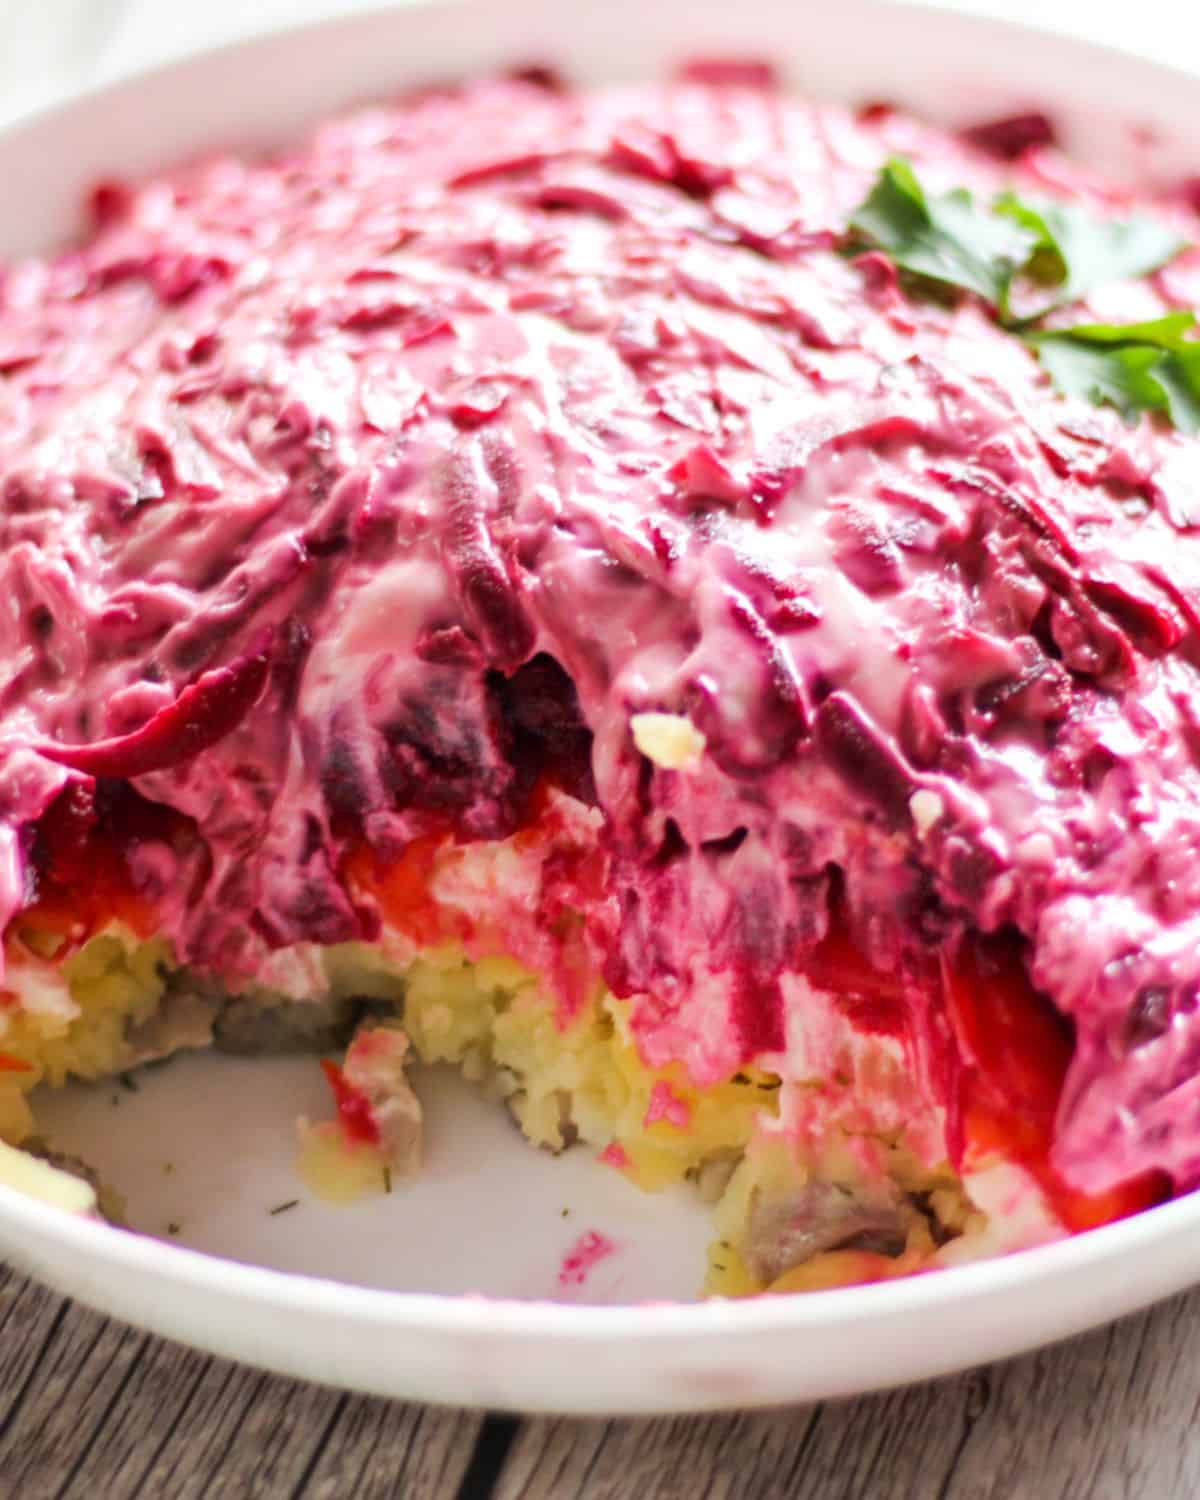 A layered salad with herring, potatoes, carrots and beets covered with mayo.